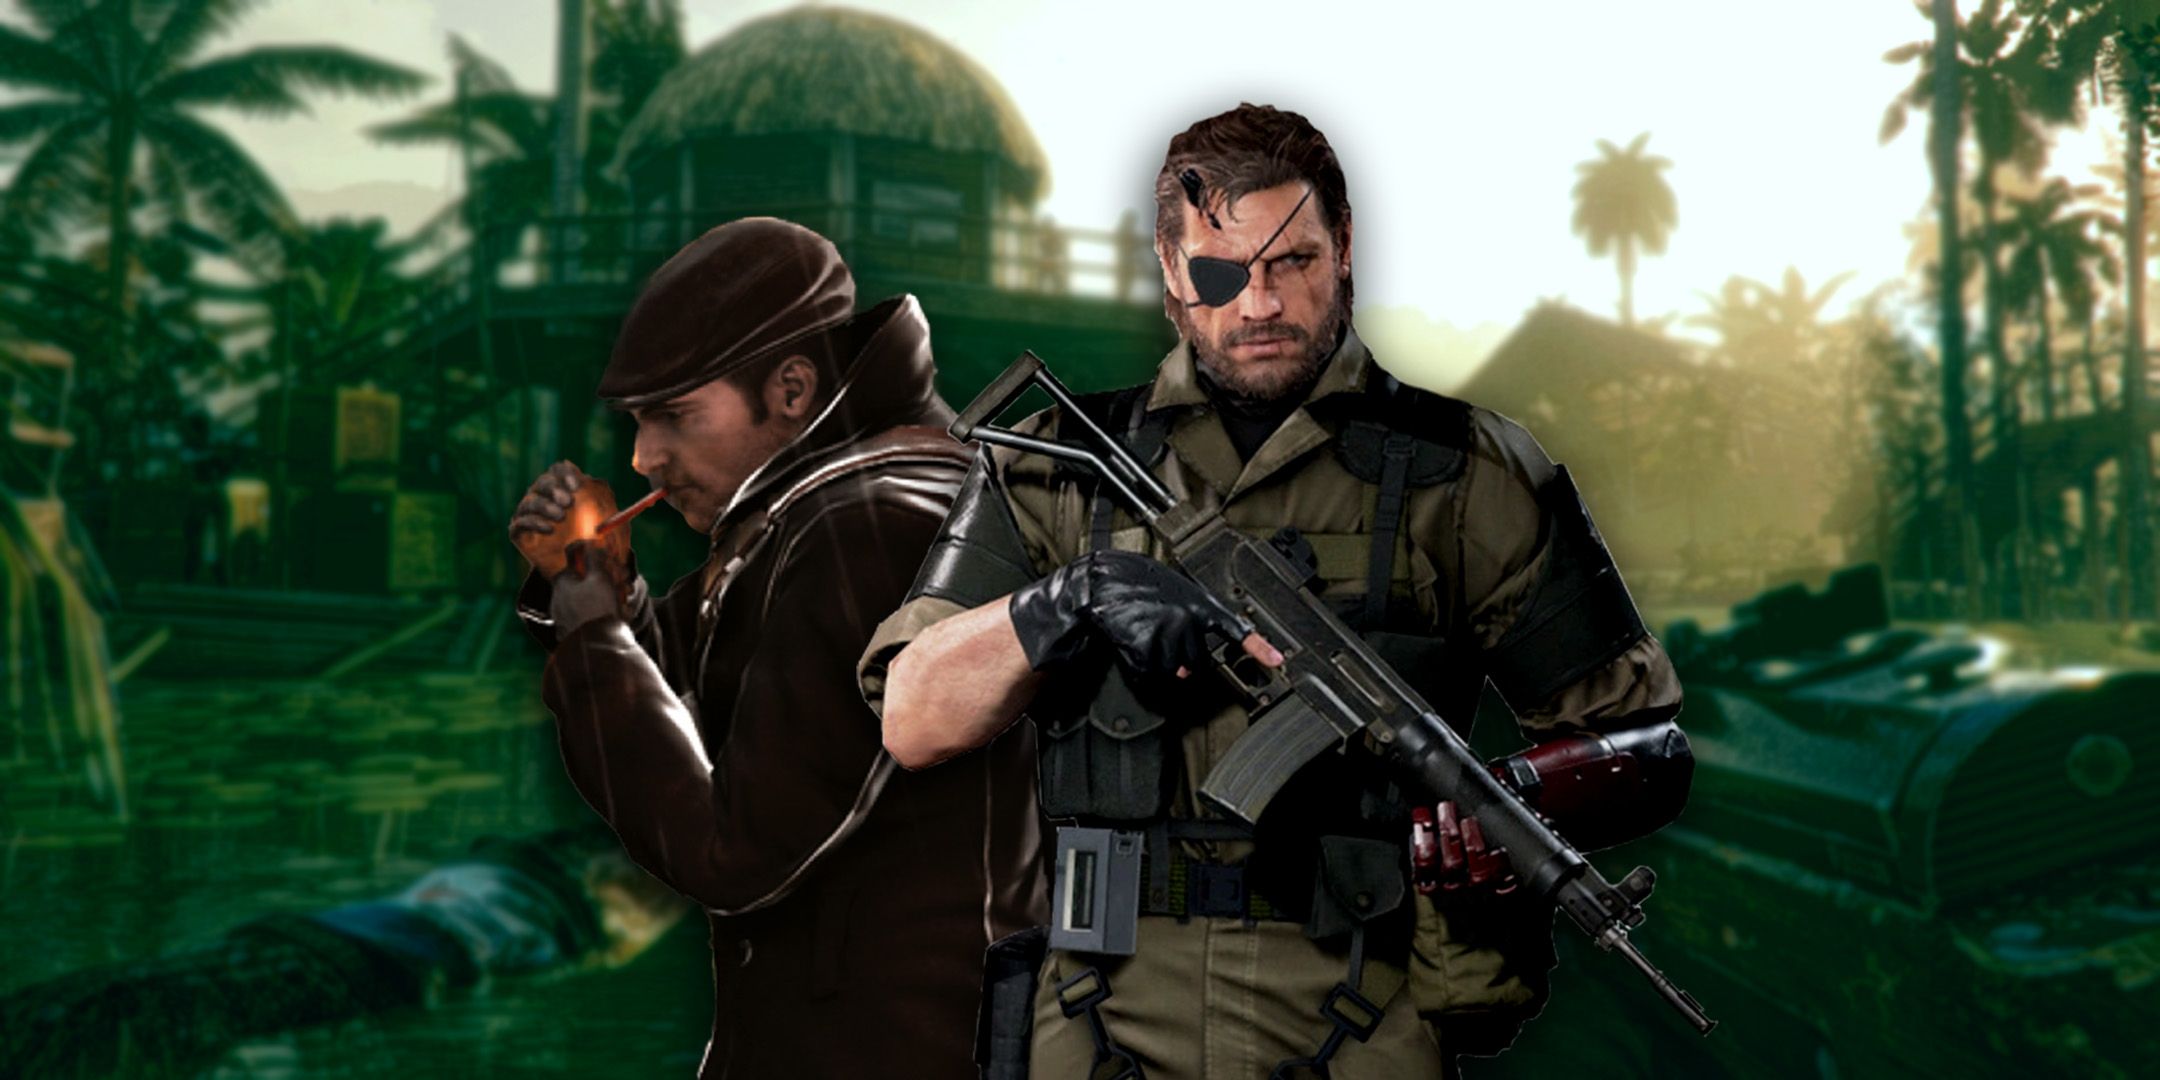 Venom Snake and the Saboteur protagonist standing in Far Cry wilderness